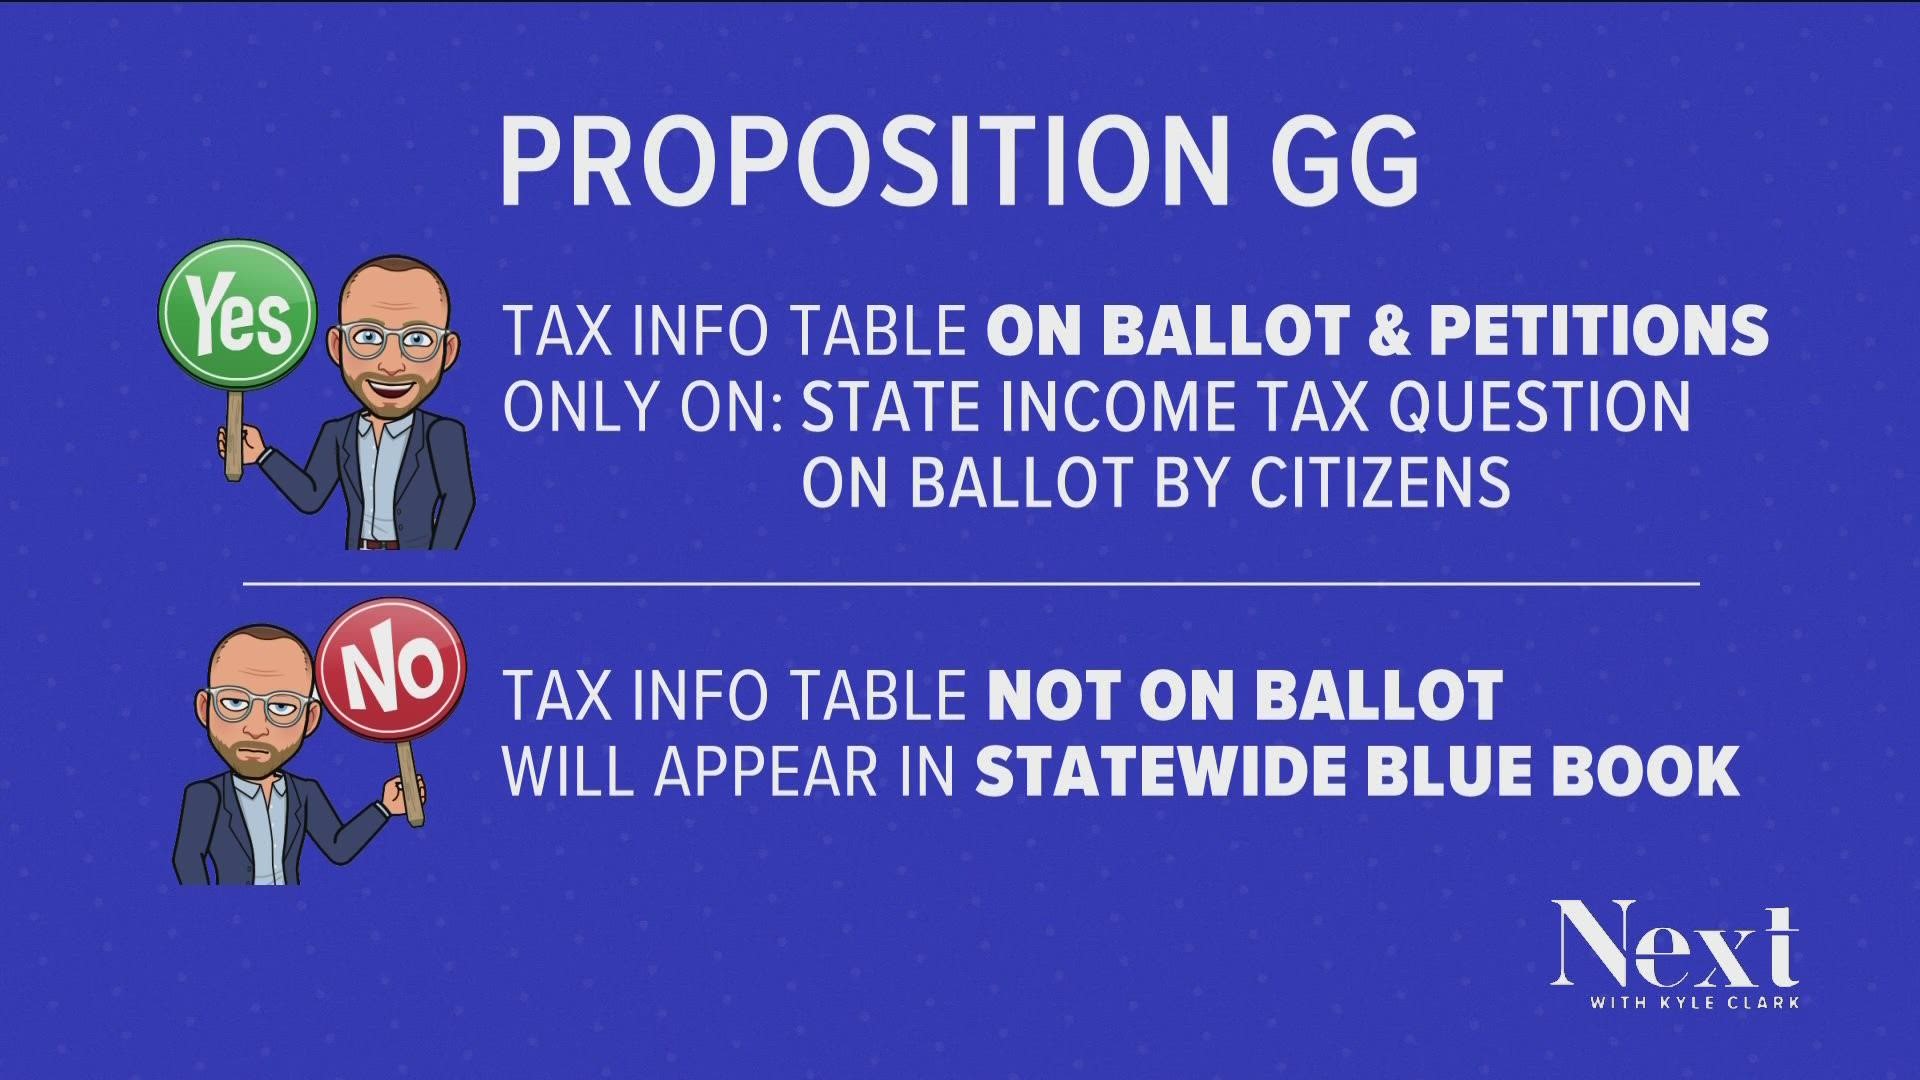 A YES vote on Proposition GG adds a tax information printed directly on your election ballot on state income tax measures that were put on the ballot.